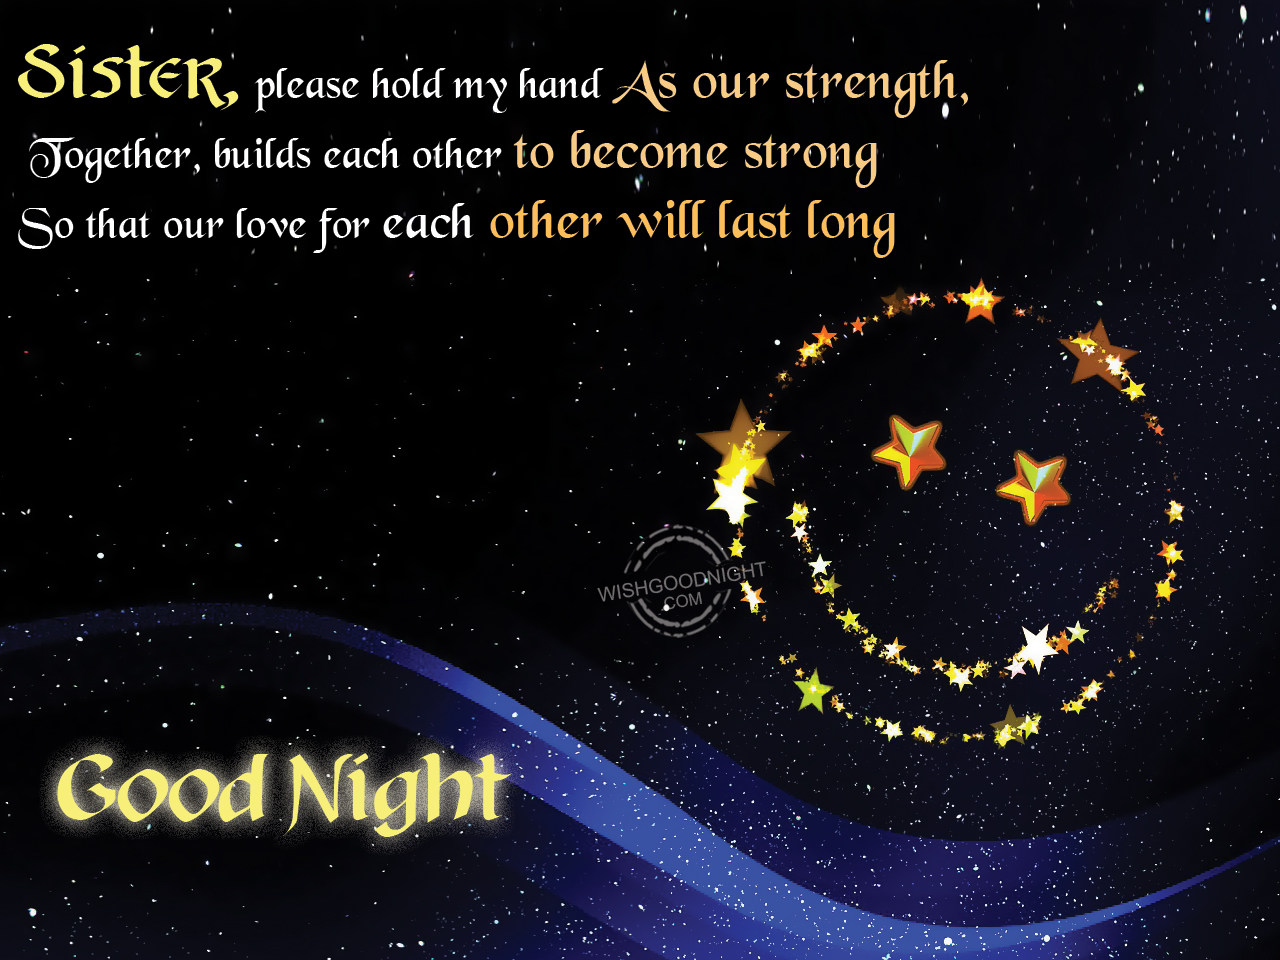 url=https://www.wishgoodnight.com/good-night-wishes-for-sister/sisterplease...